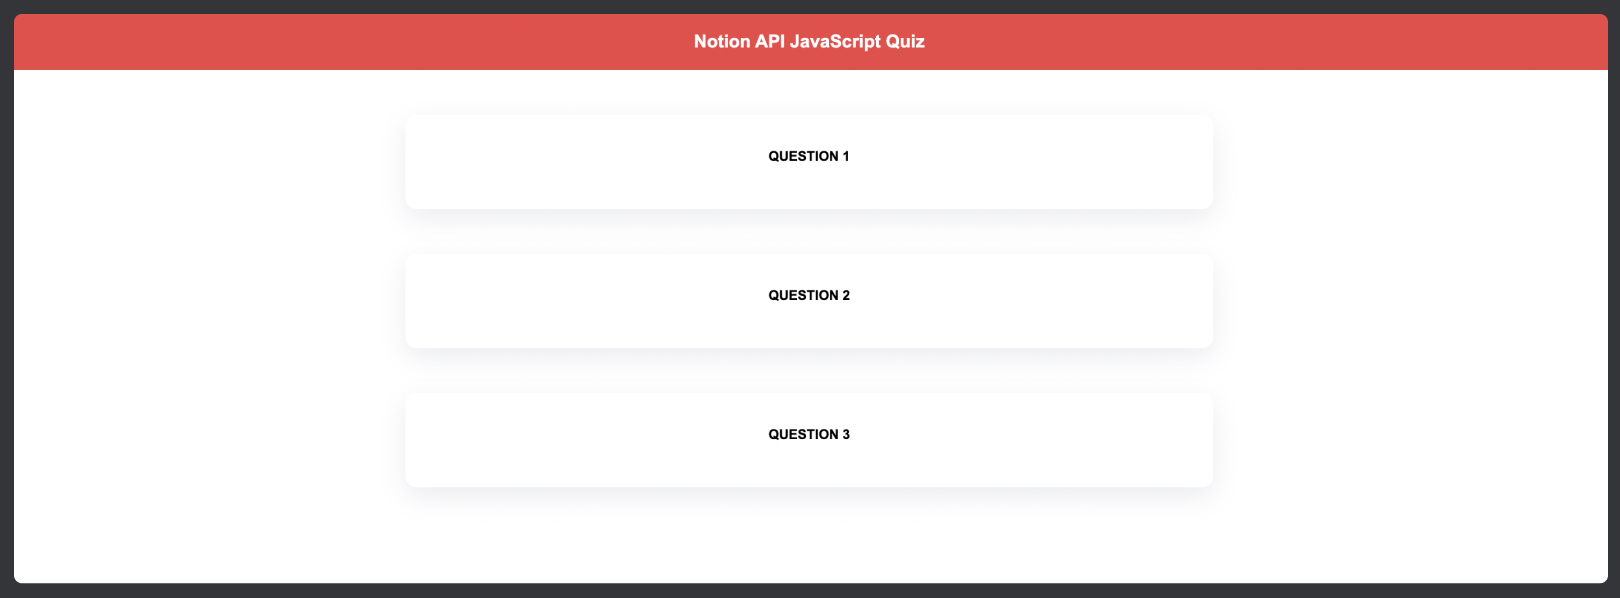 We're now rendering a card for each question and displaying a header for it that reads Question ${index + 1}